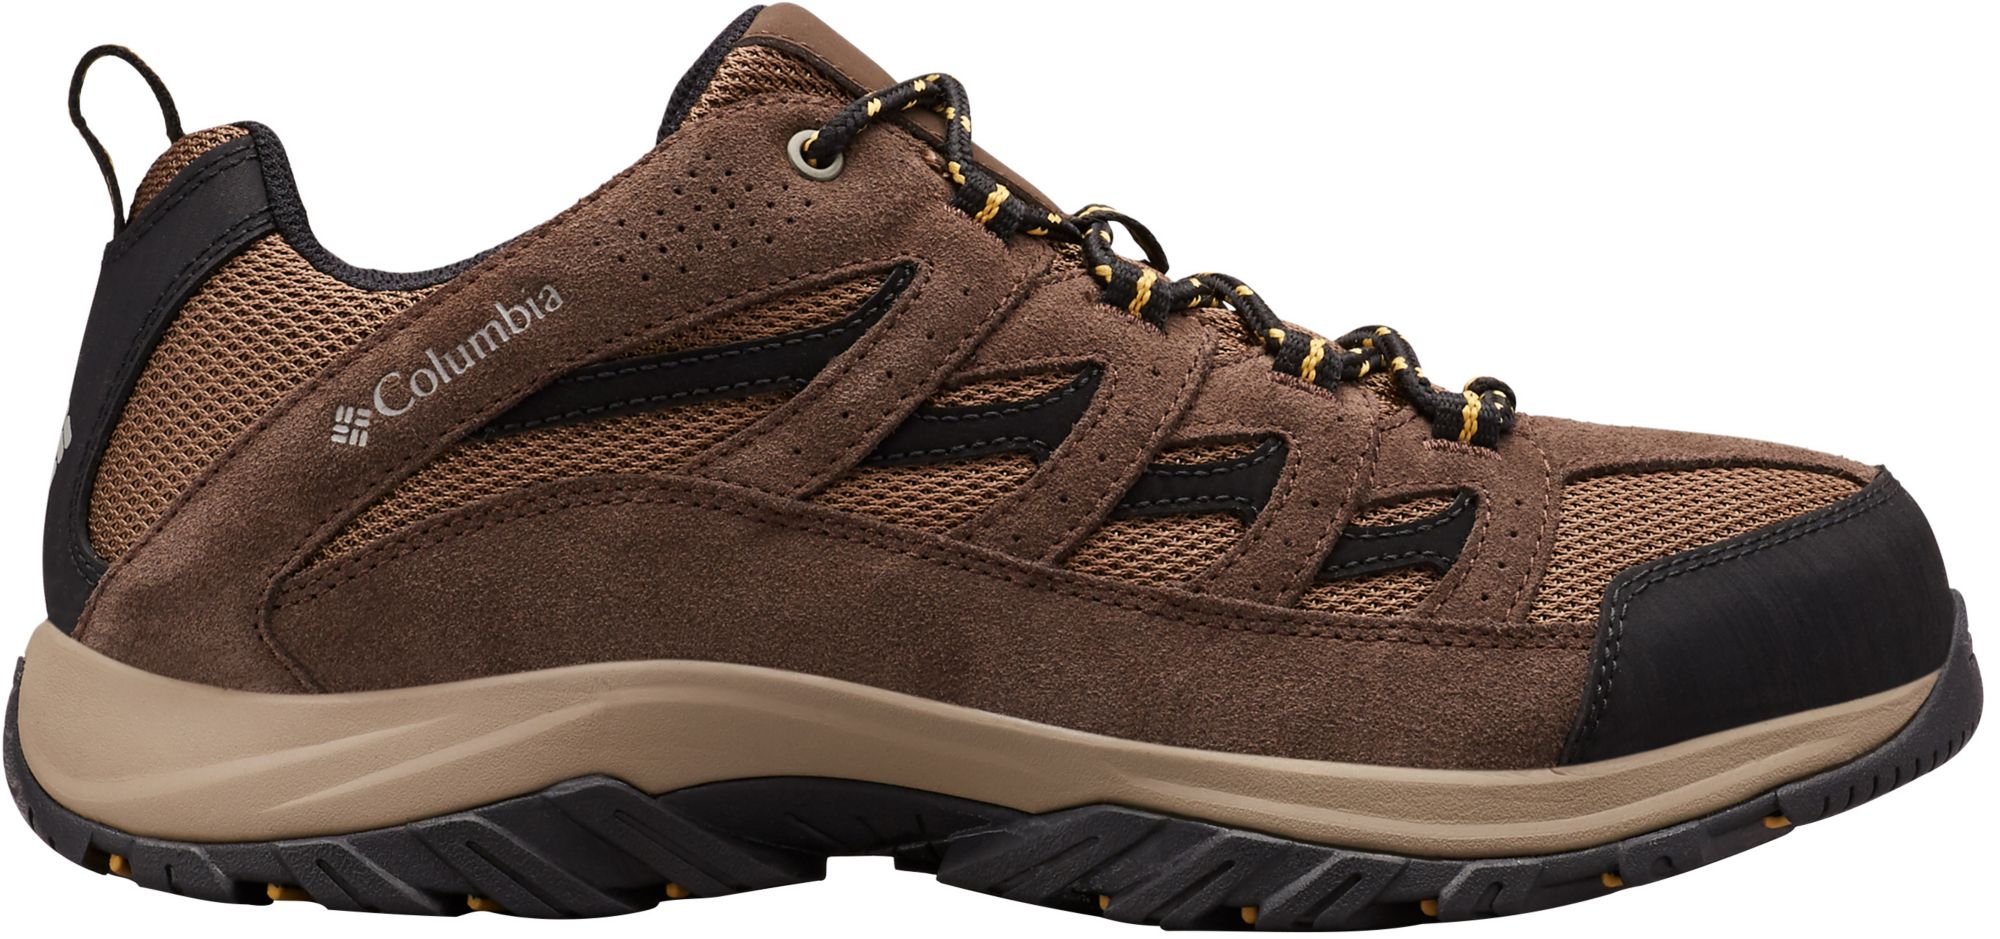 Photos - Trekking Shoes Columbia Men's Crestwood Hiking Shoes, Size 13, Dark Brown | Father's Day 